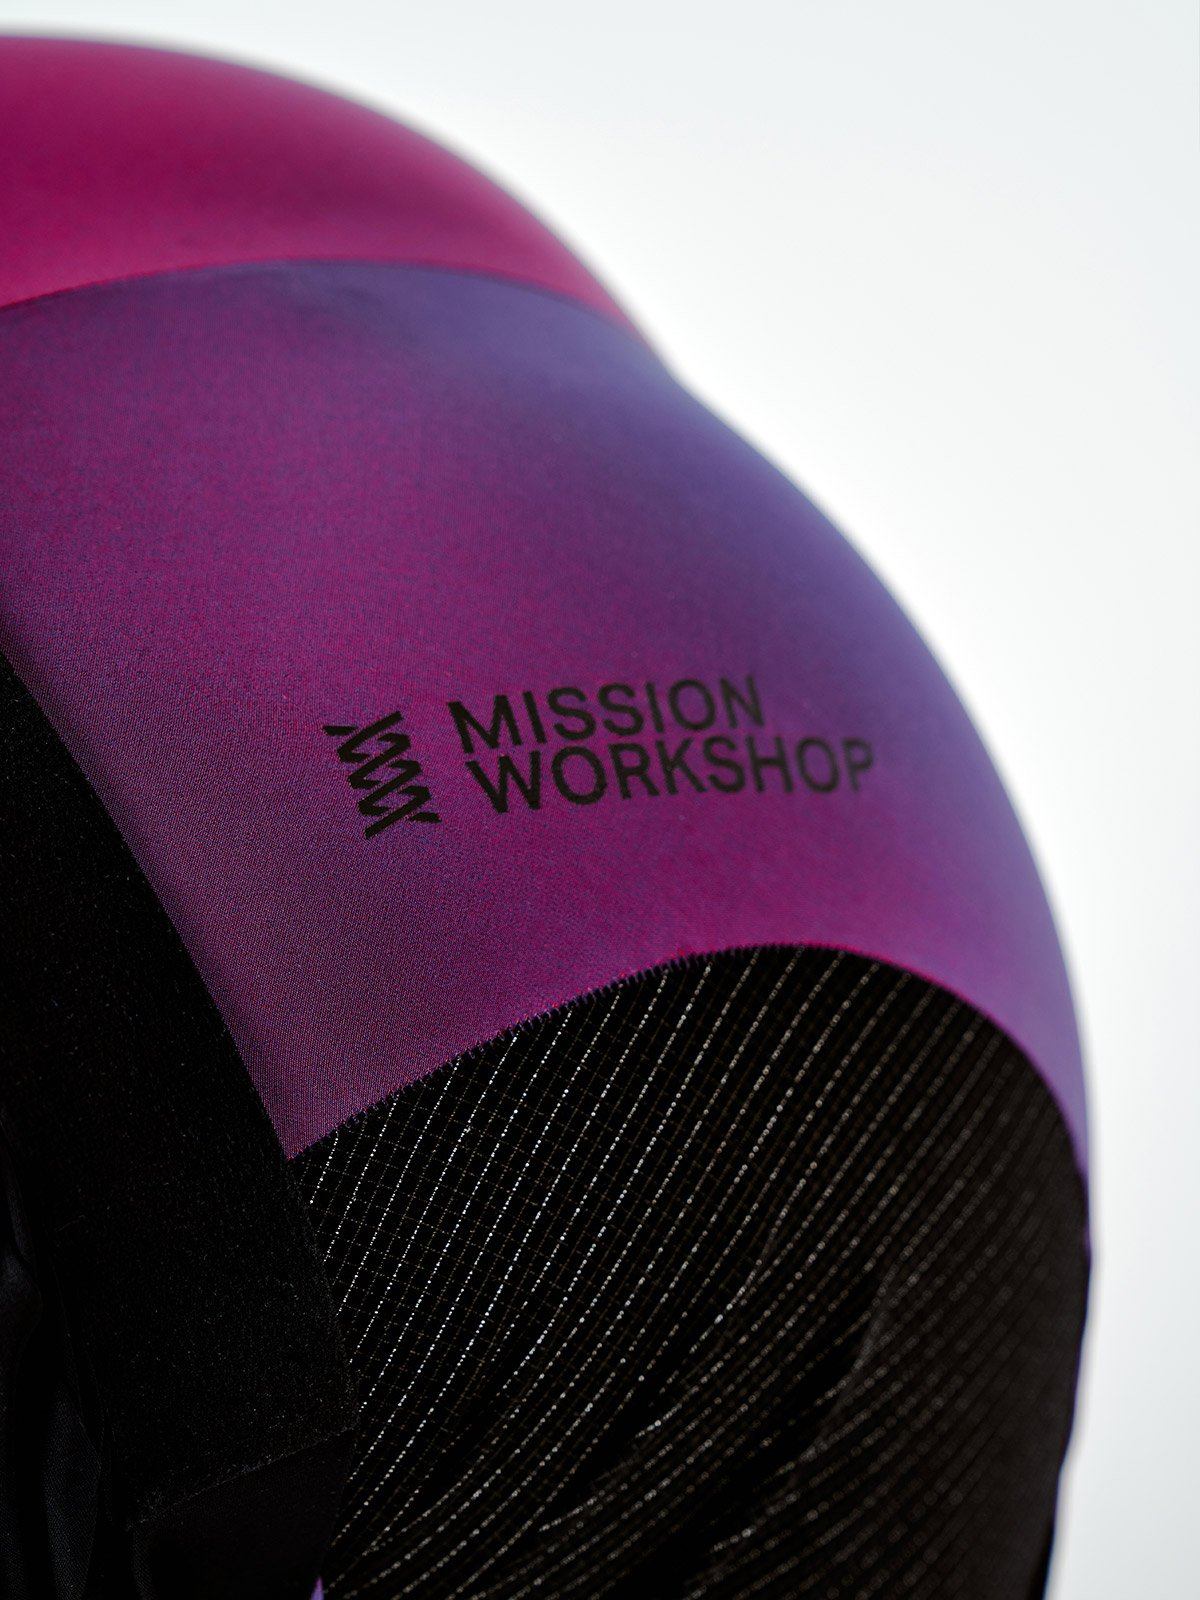 Mission Pro Bib Men's by Mission Workshop - Weatherproof Bags & Technical Apparel - San Francisco & Los Angeles - Built to endure - Guaranteed forever